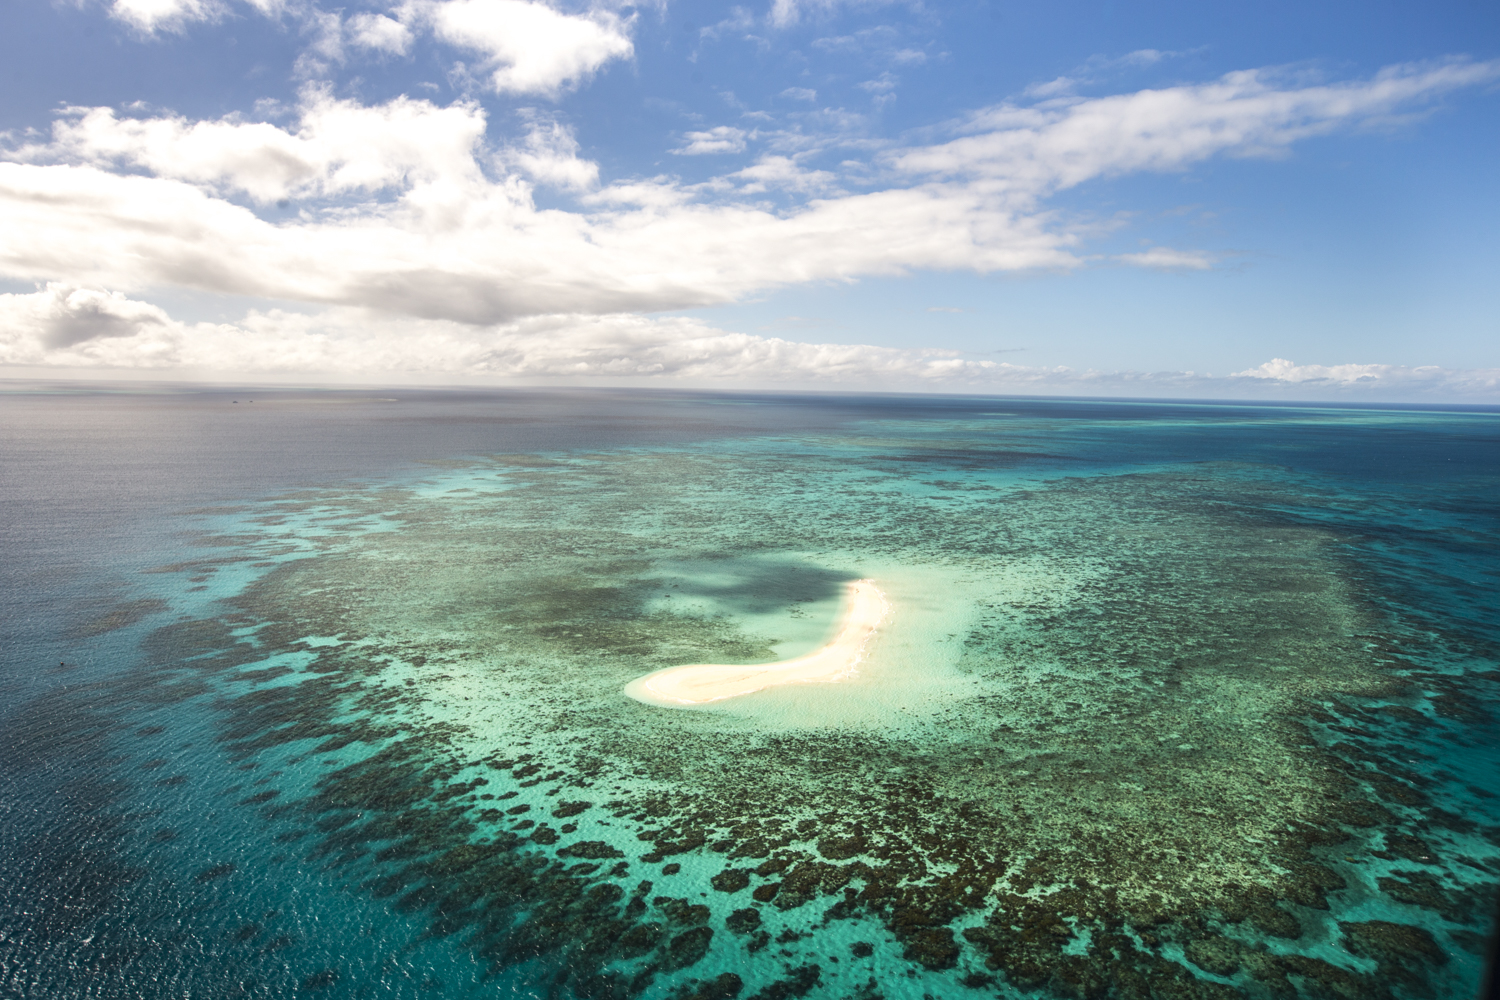 WWFs Living Planet Report echoed on the Great Barrier Reef